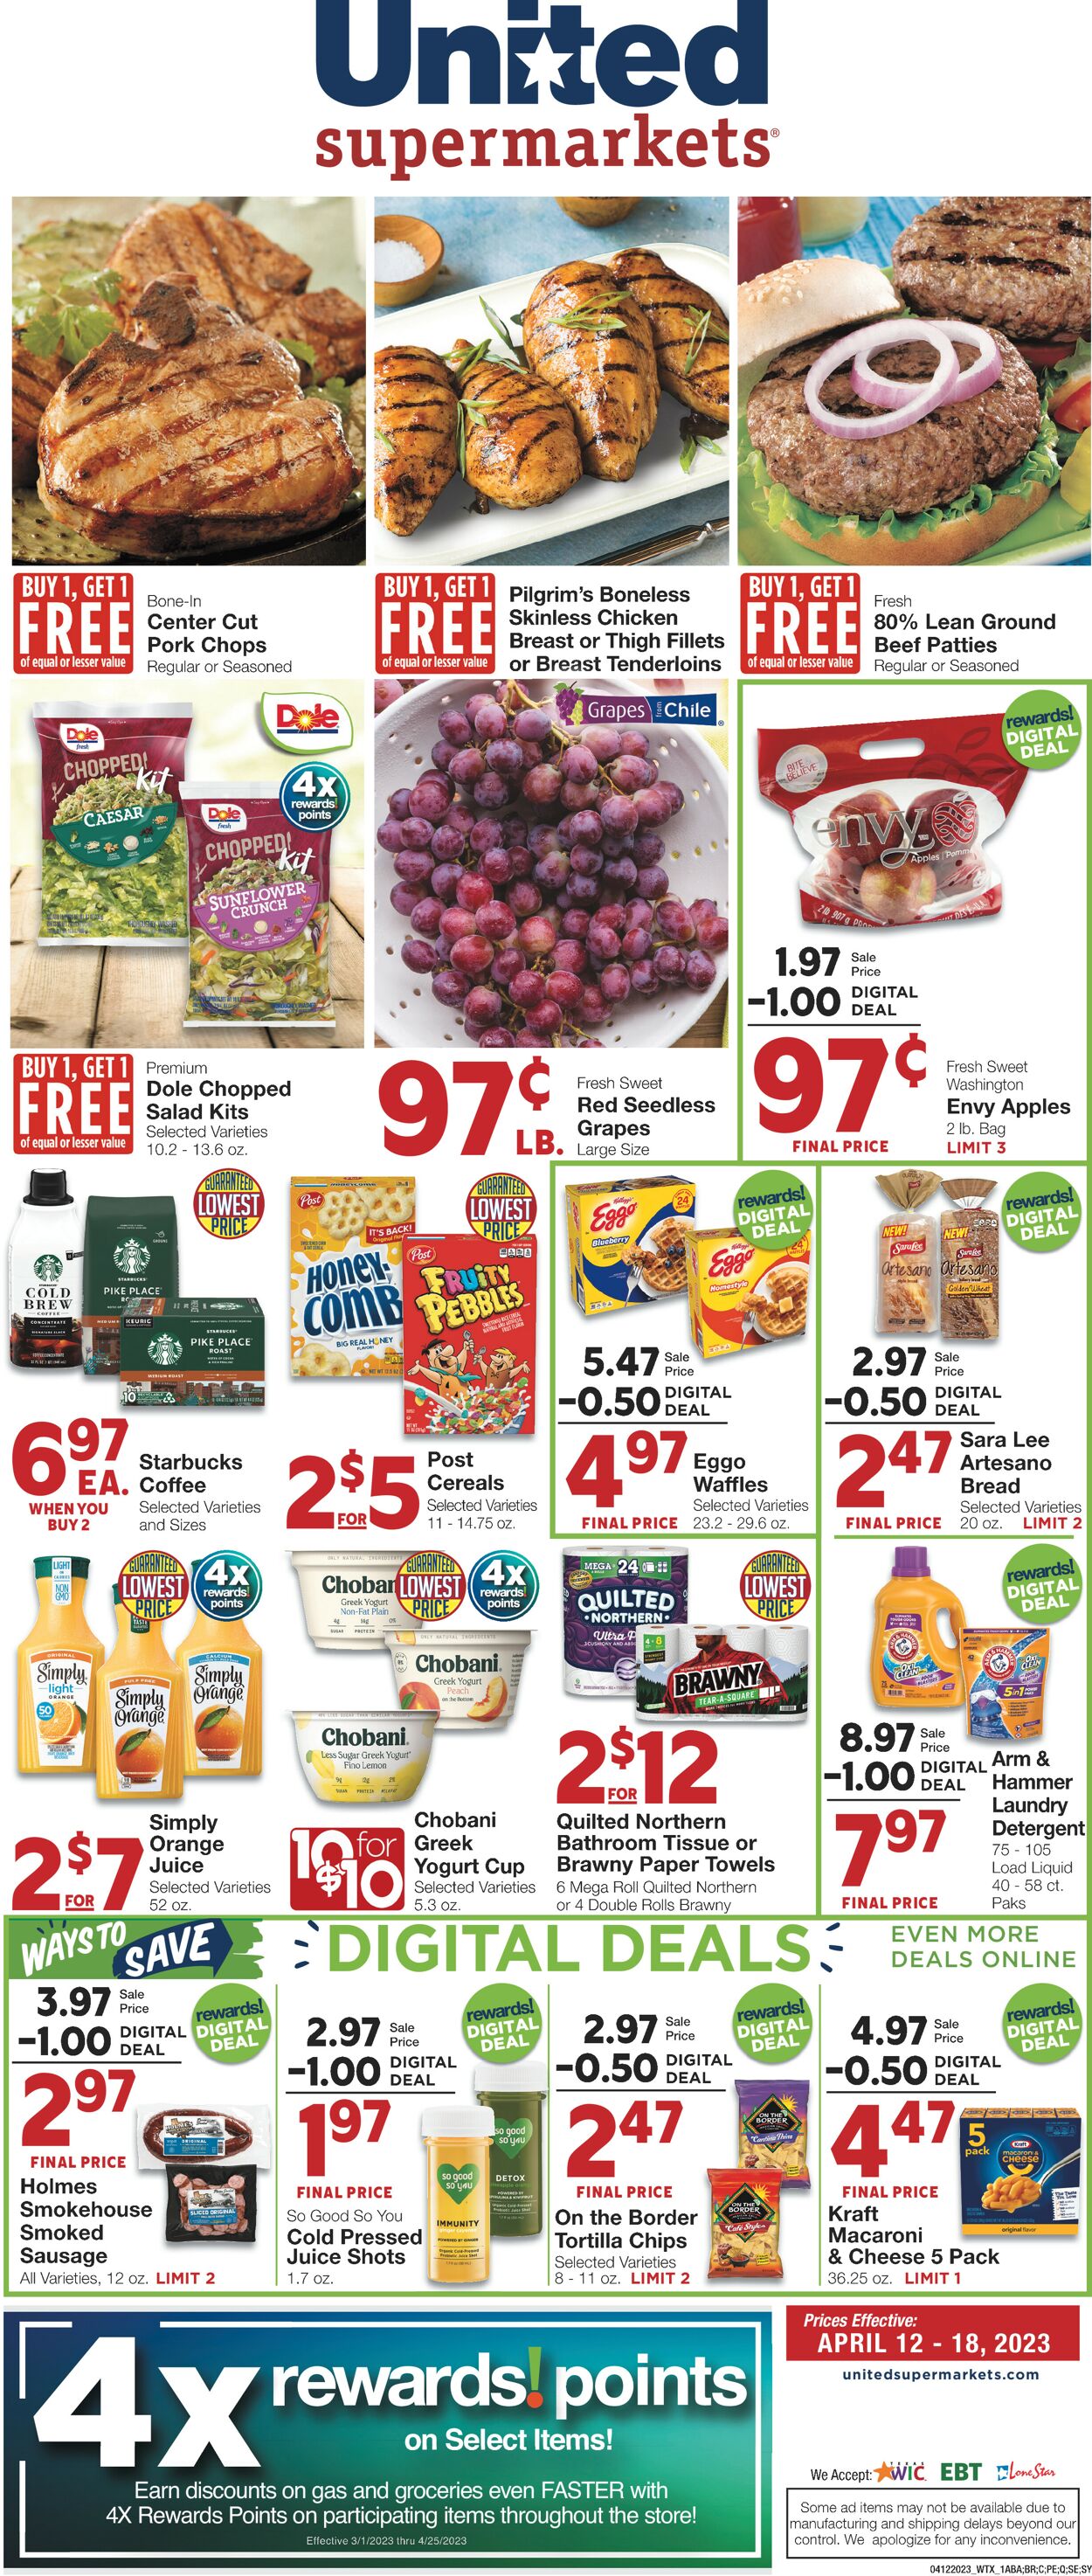 United Supermarkets Current weekly ad 04/12 - 04/18/2023